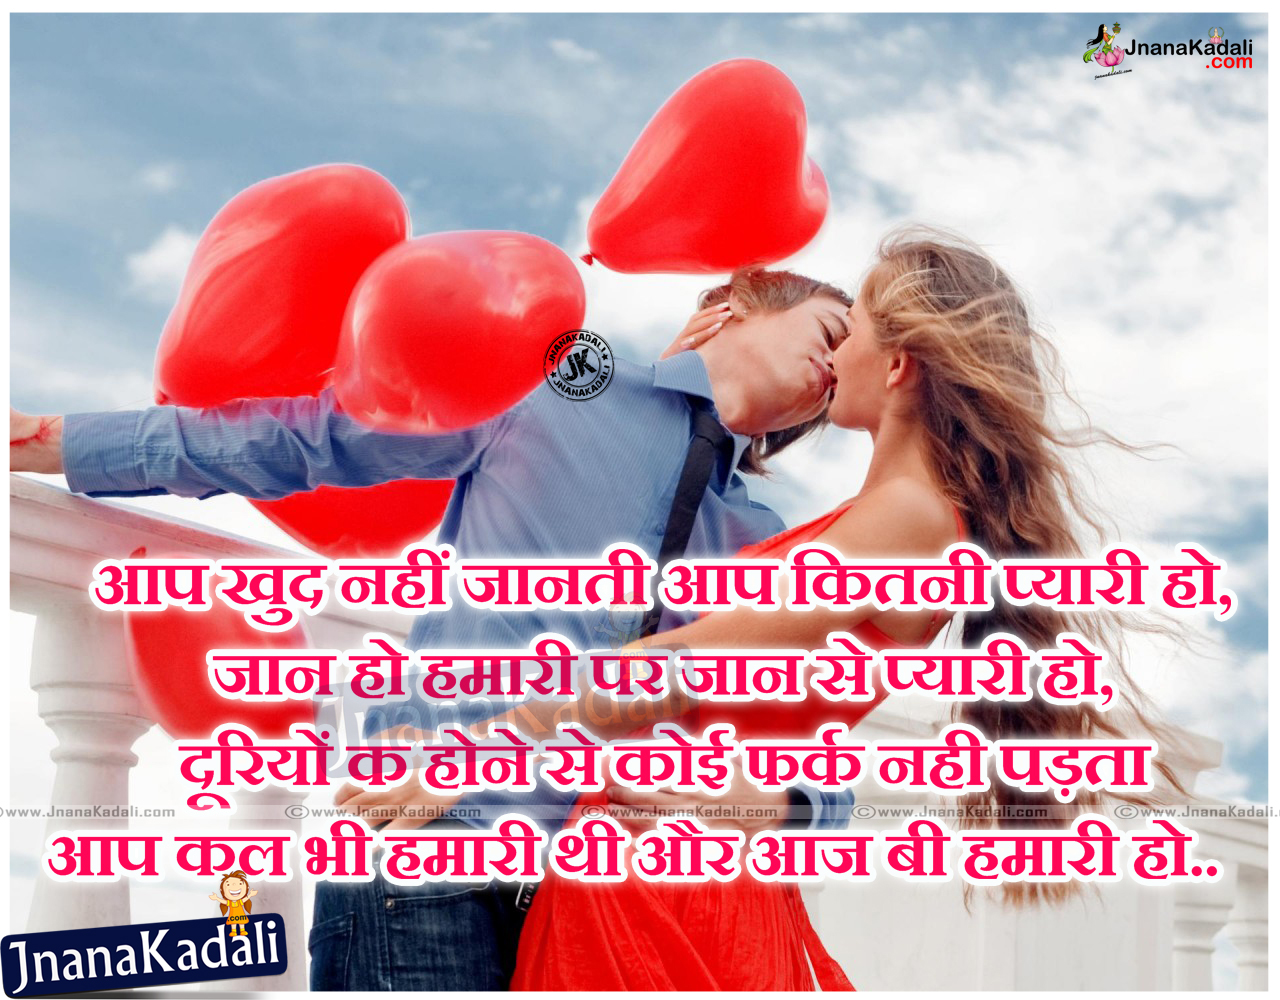 Love Couple Image With Shayari In Hindi - Professional Boxing , HD Wallpaper & Backgrounds